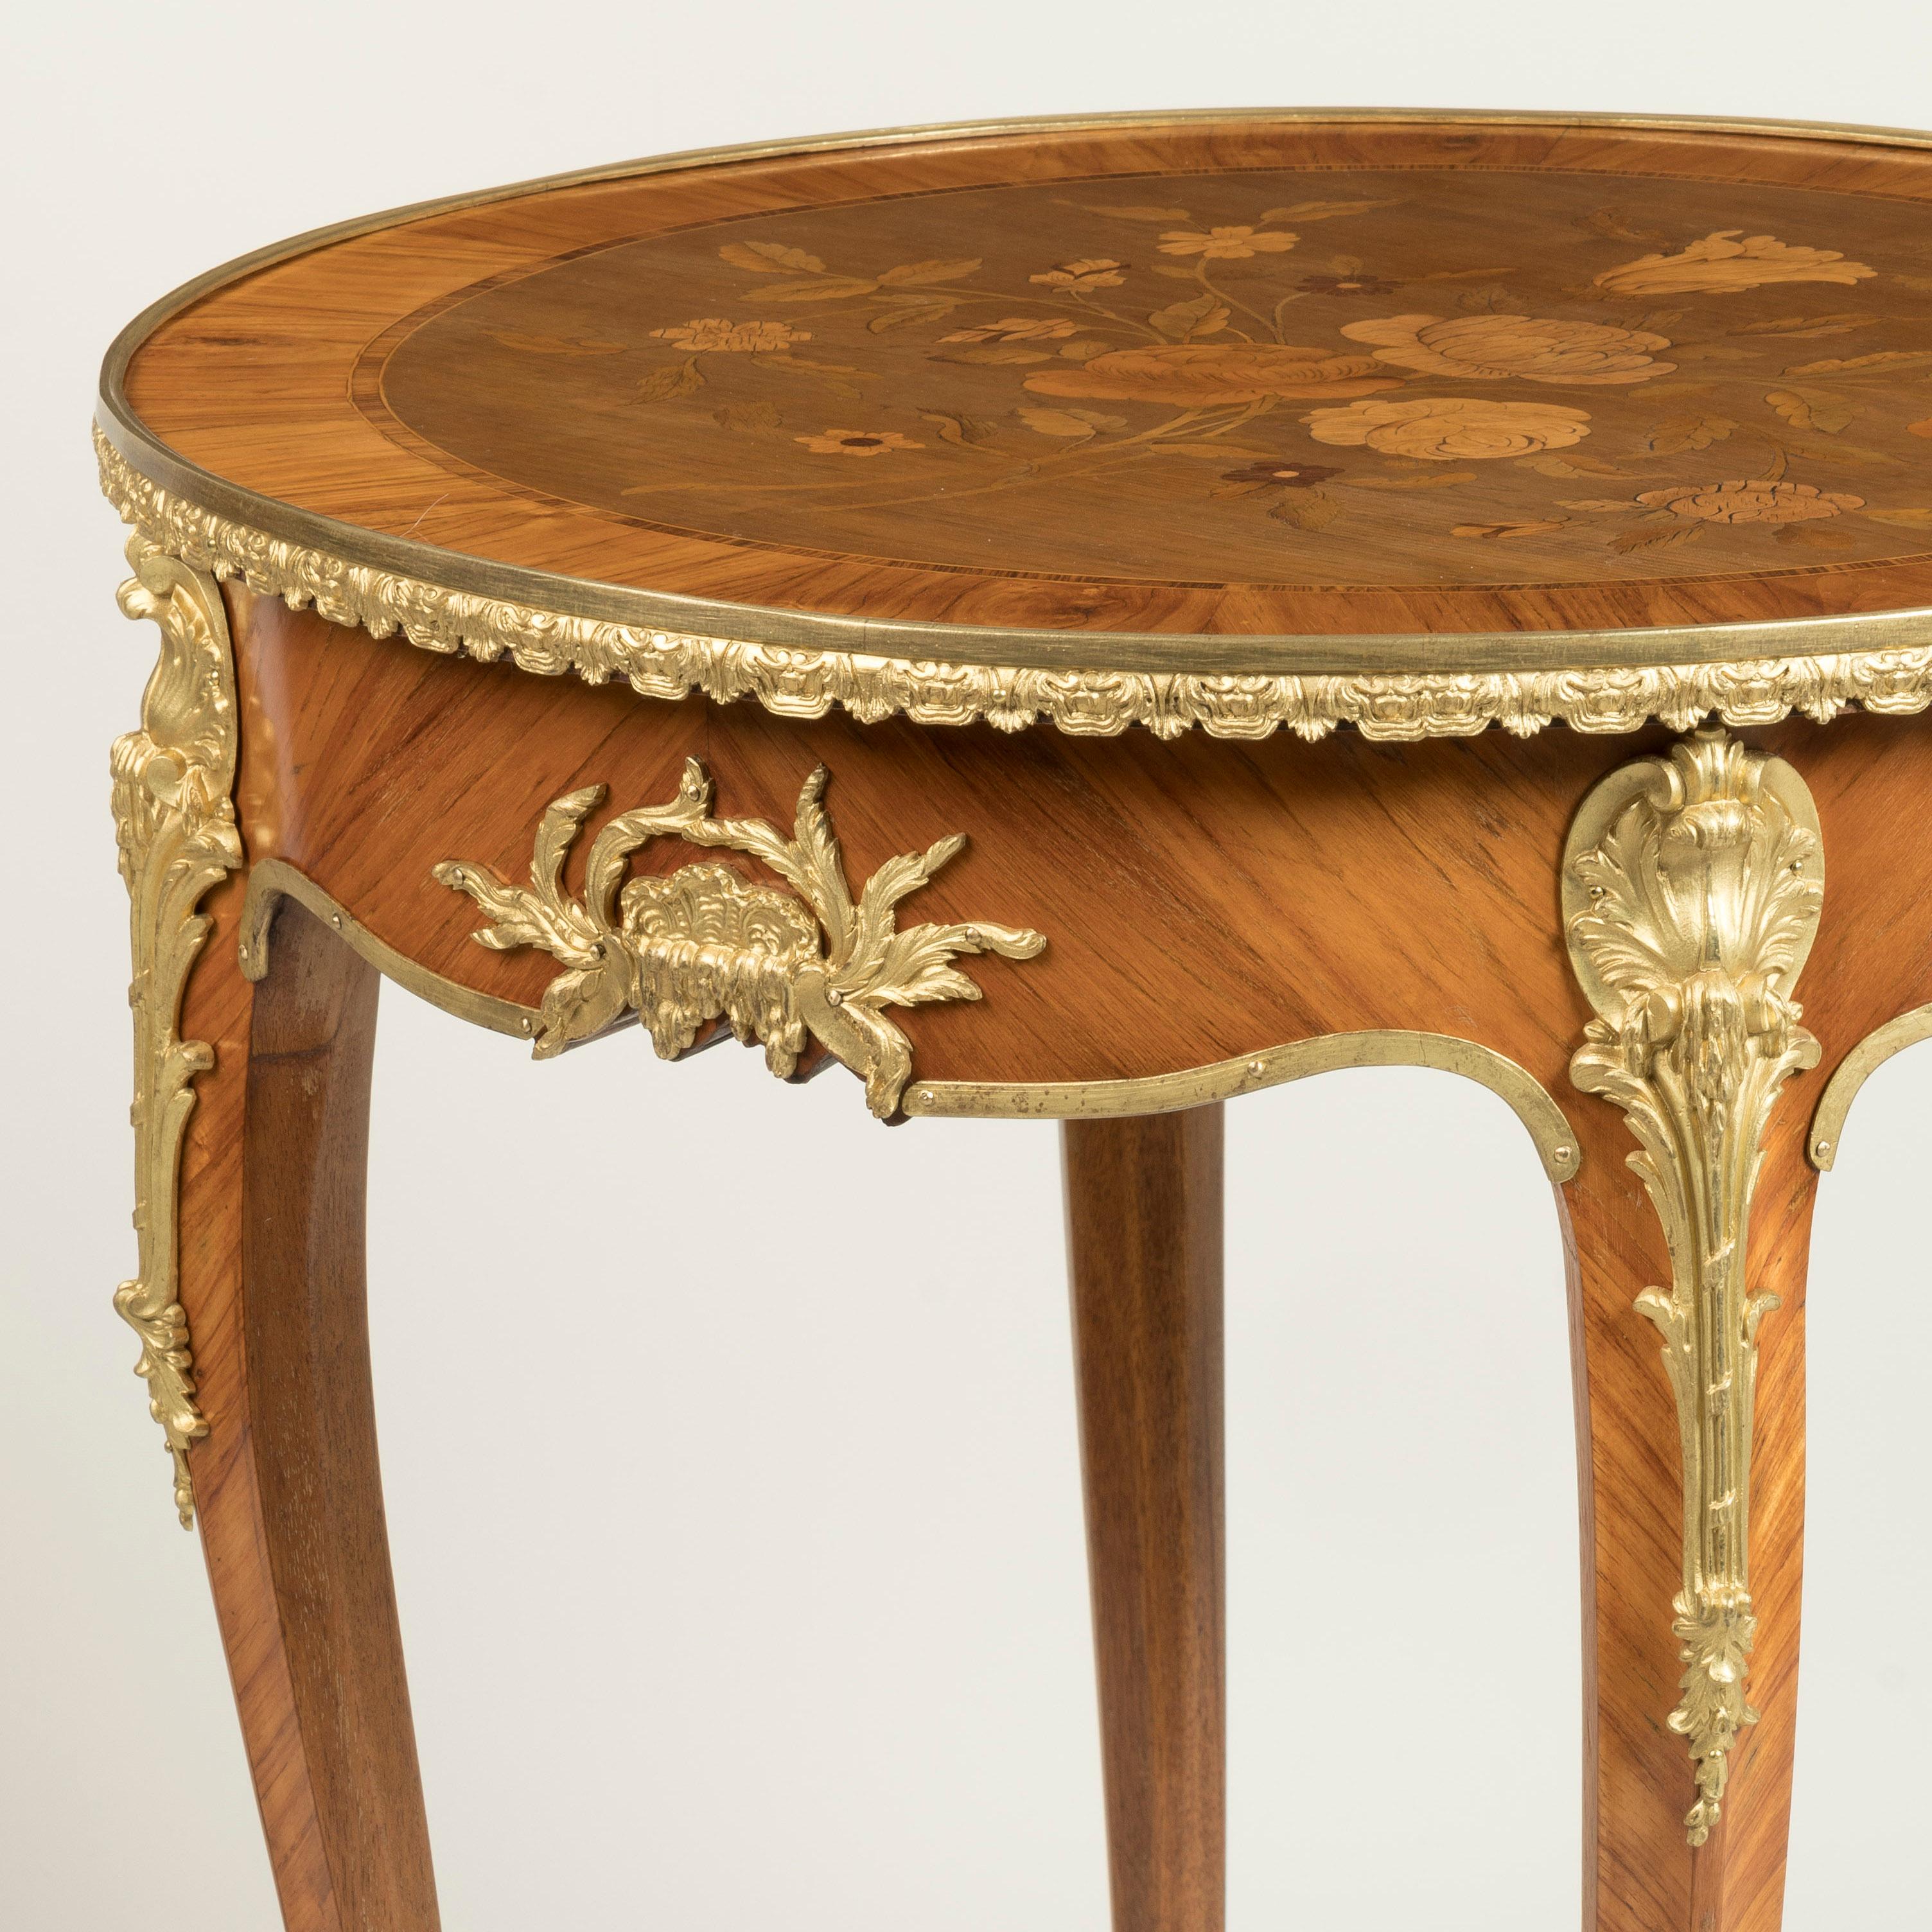 19th Century Marquetry Inlaid & Ormolu Table attributed to François Linke For Sale 2